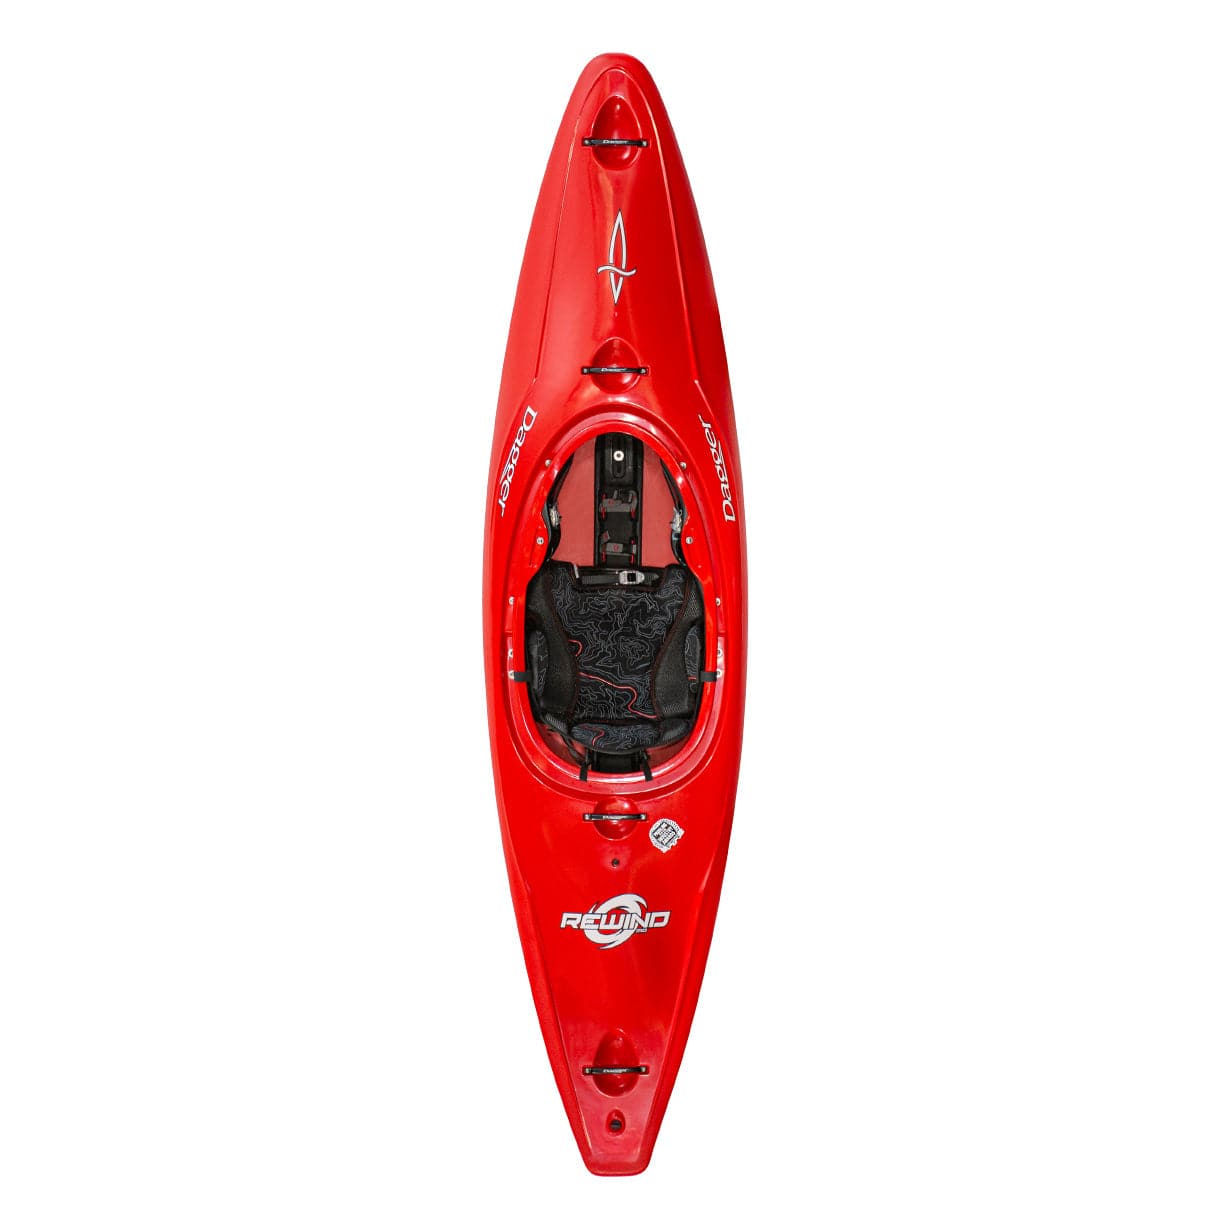 Featuring the Rewind creek boat, freestyle kayak, play boat, pre-order, river runner kayak manufactured by Dagger shown here from one angle.